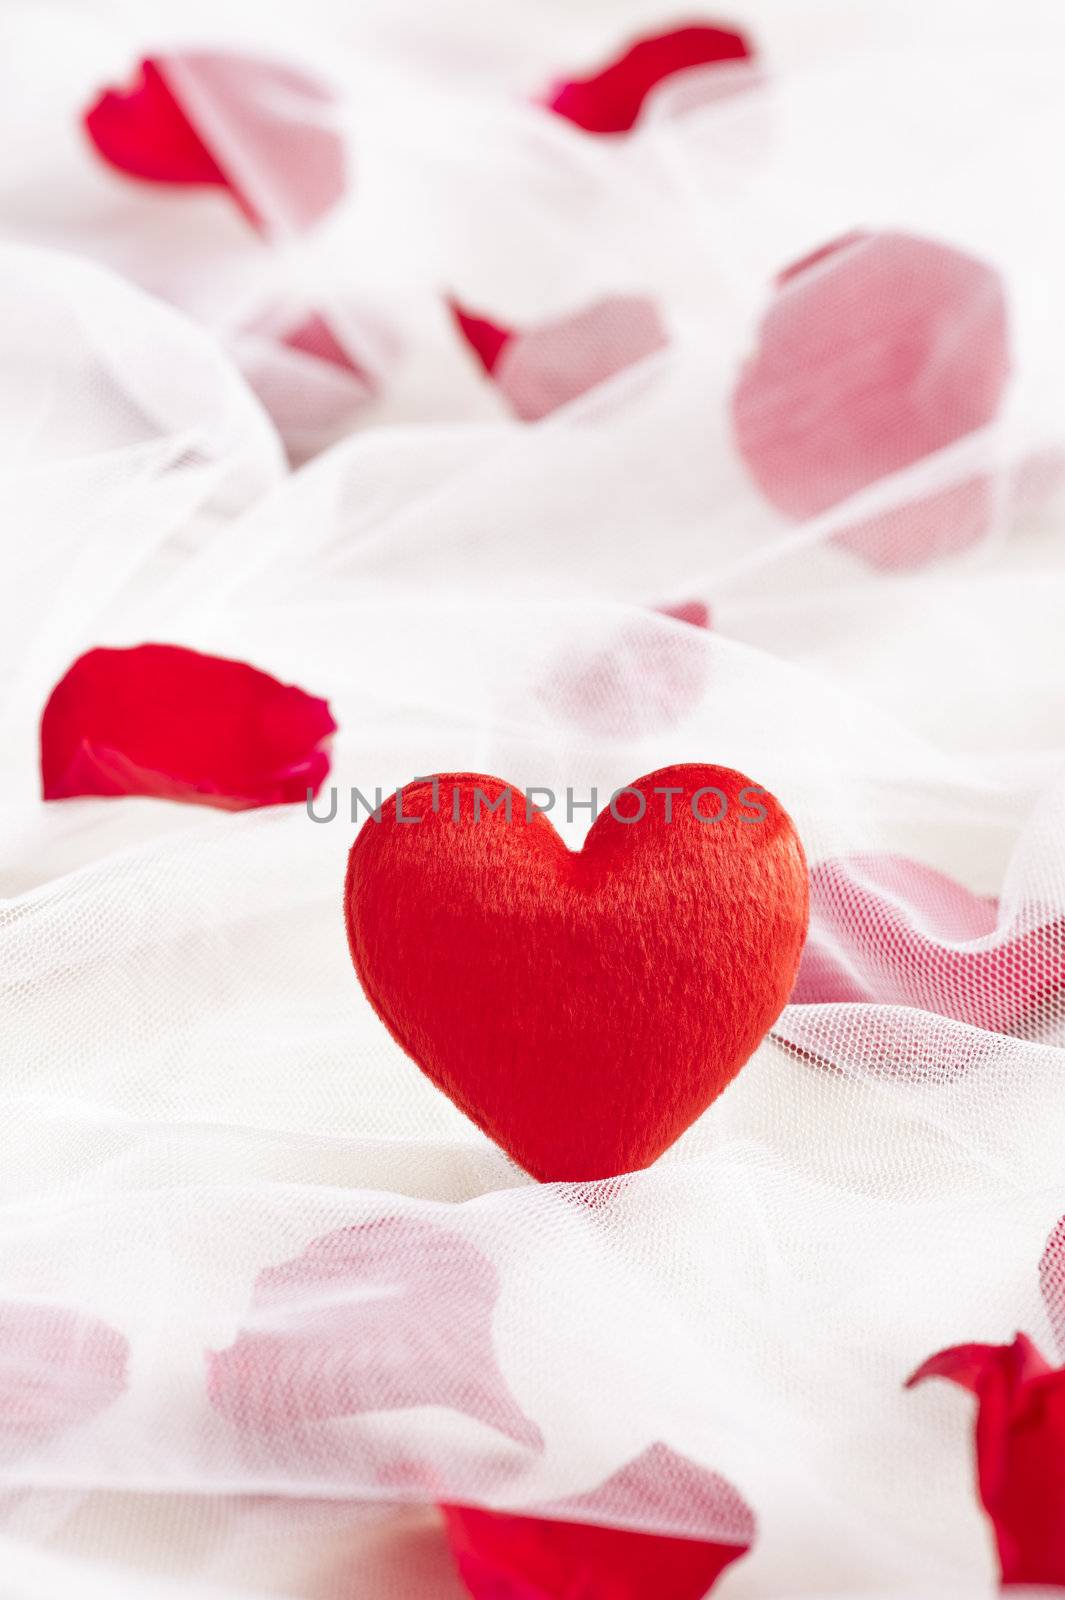 Nice red heart on wedding veil with rose petals